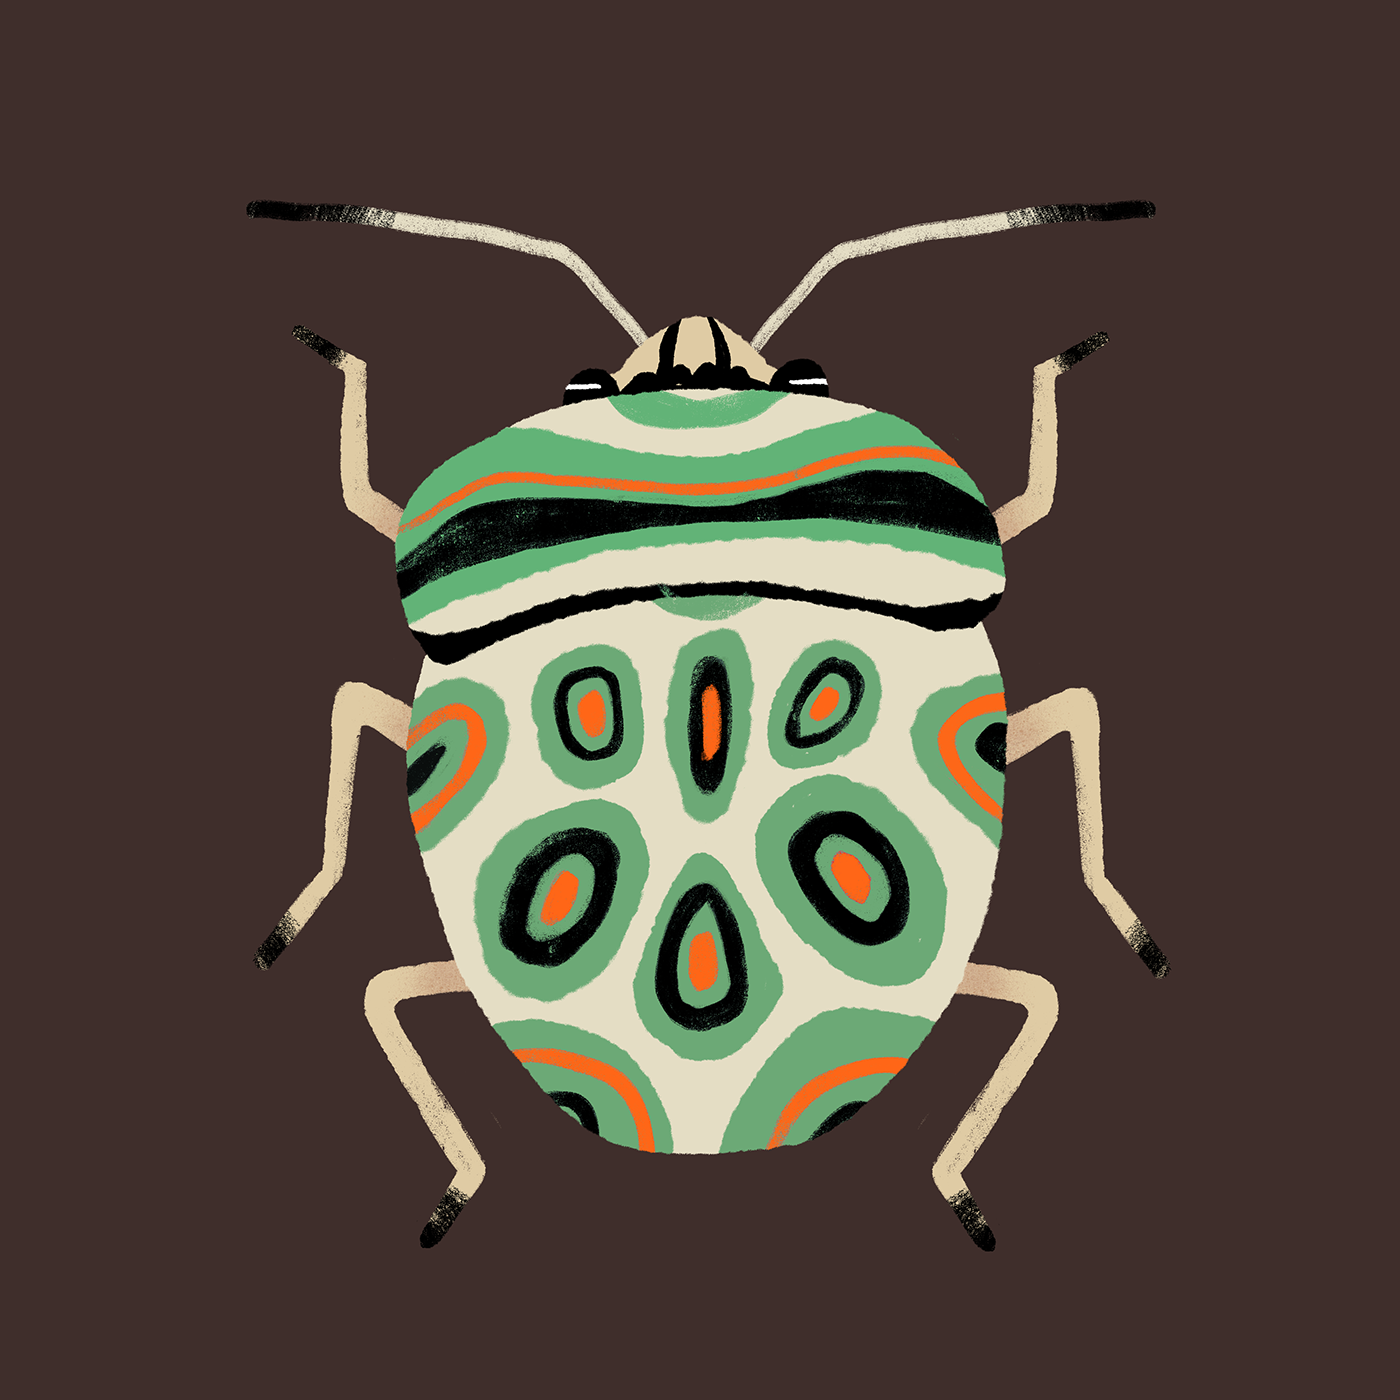 Insects bugs gif texture